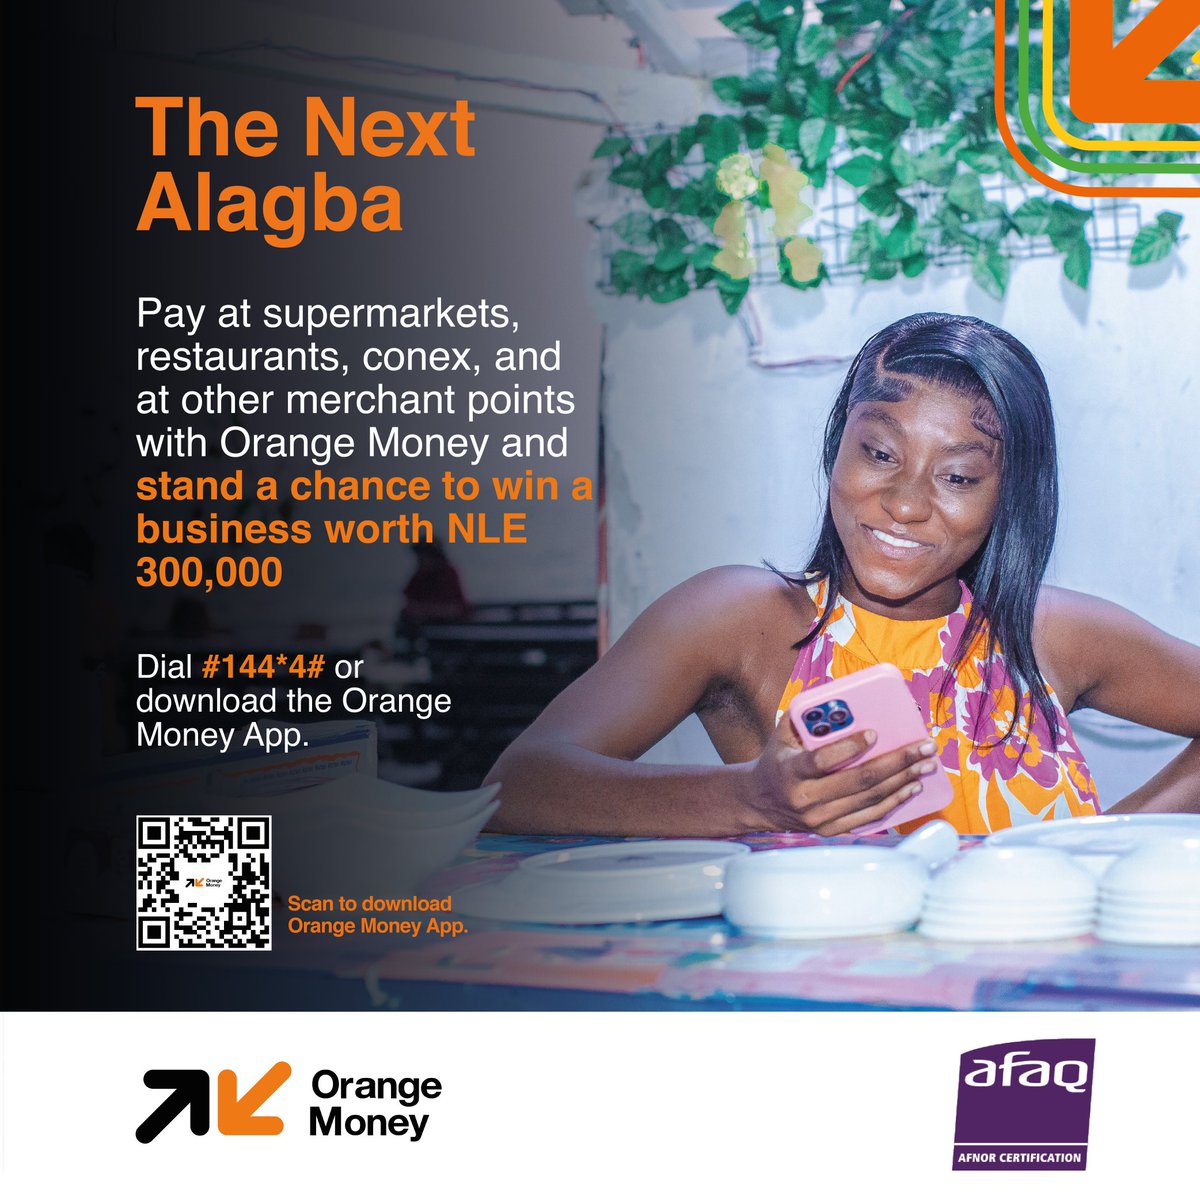 The Next Alagba.

Pay na supermarkit, restaurant, Conex fuel station dem en other merchant Dem with Orange Money en stand a chance for win bizness way worth up to NLE 300,000. 

All yu need for do na for dial #144*4# or download the Orange Money App.

#orangesl #OrangeMoney…